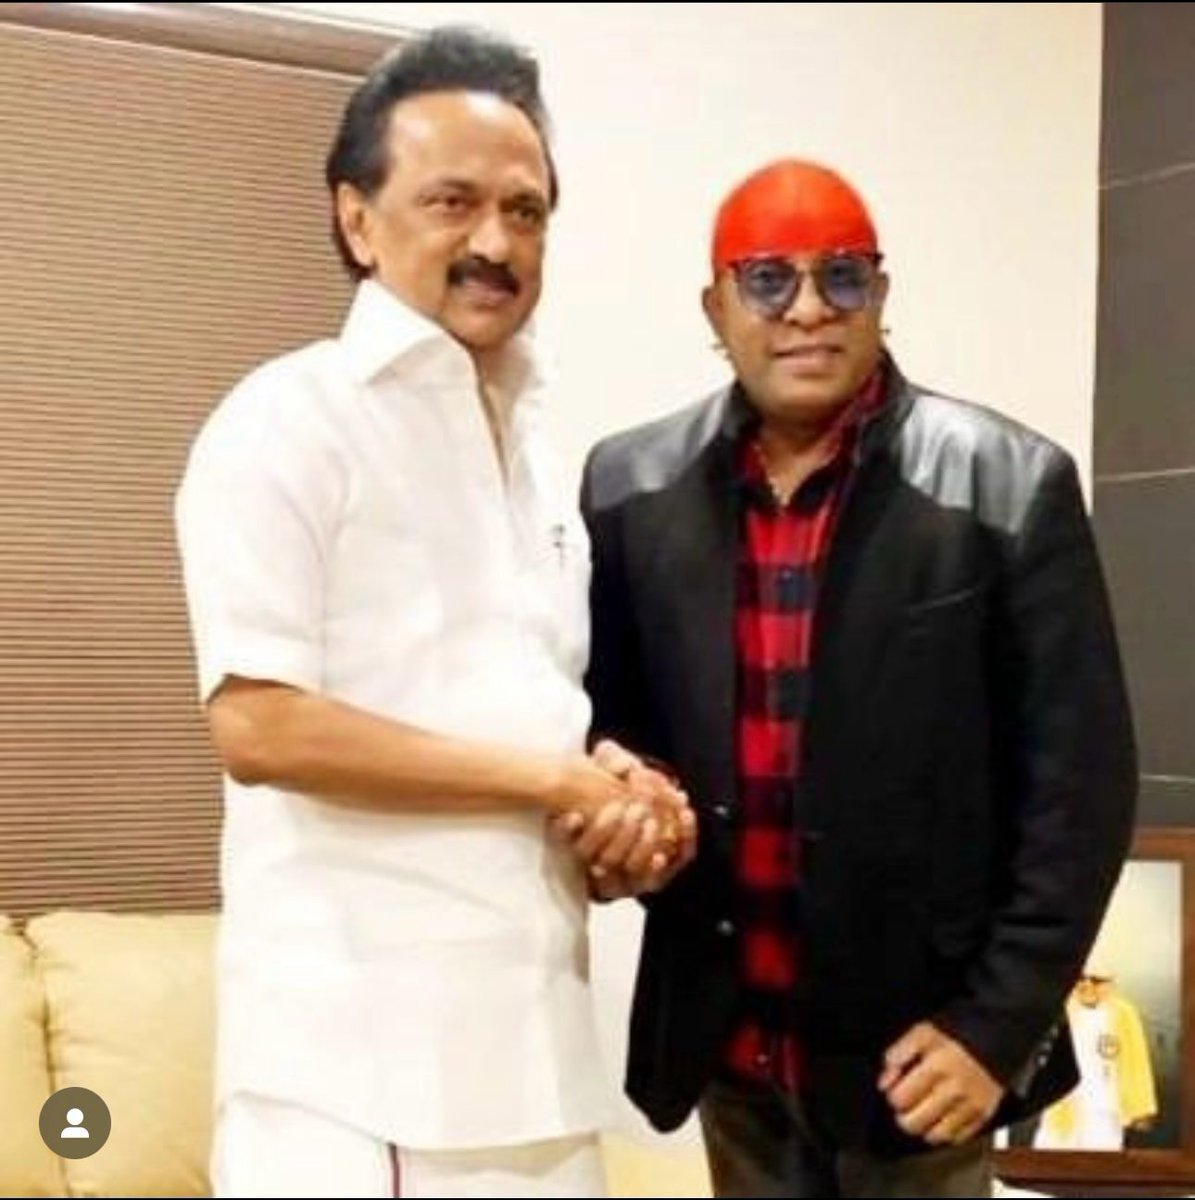 Dear Thiru @mkstalin Ji, பிறந்தநாள் வாழ்த்துக்கள்🎊🎂💕🌹 I pray to the Almighty for a long and healthy life for you #happybirthday